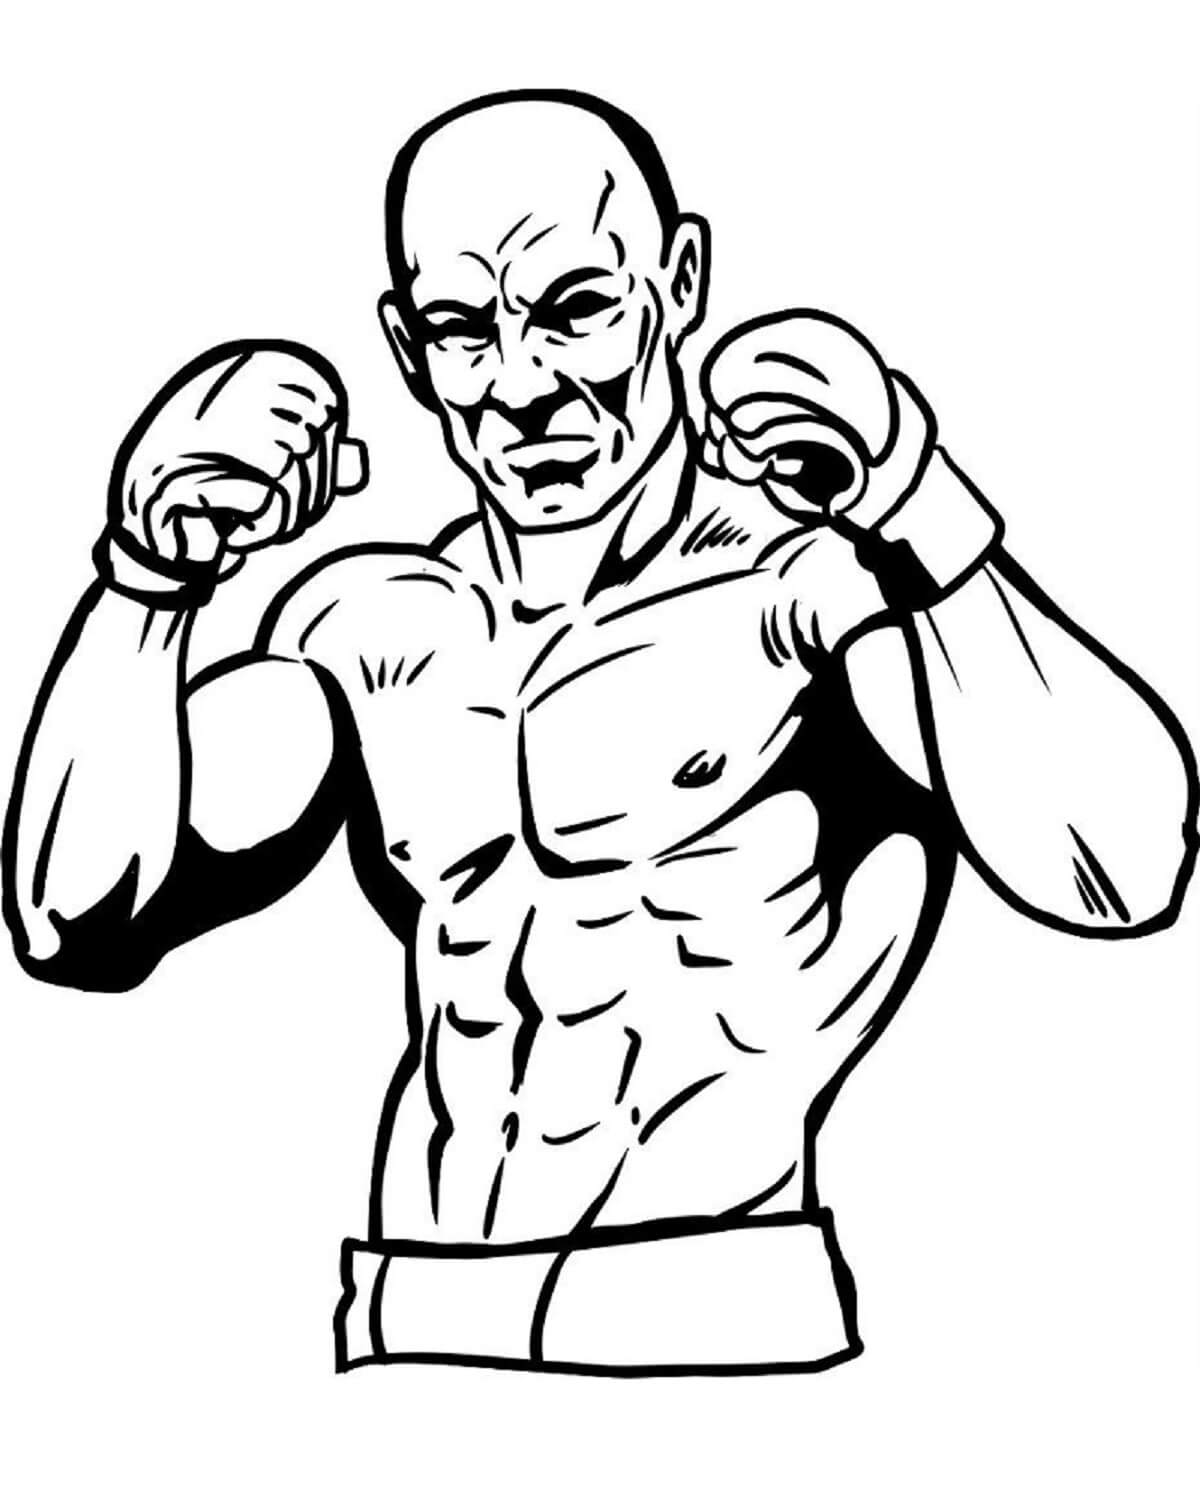 Boxer coloring pages